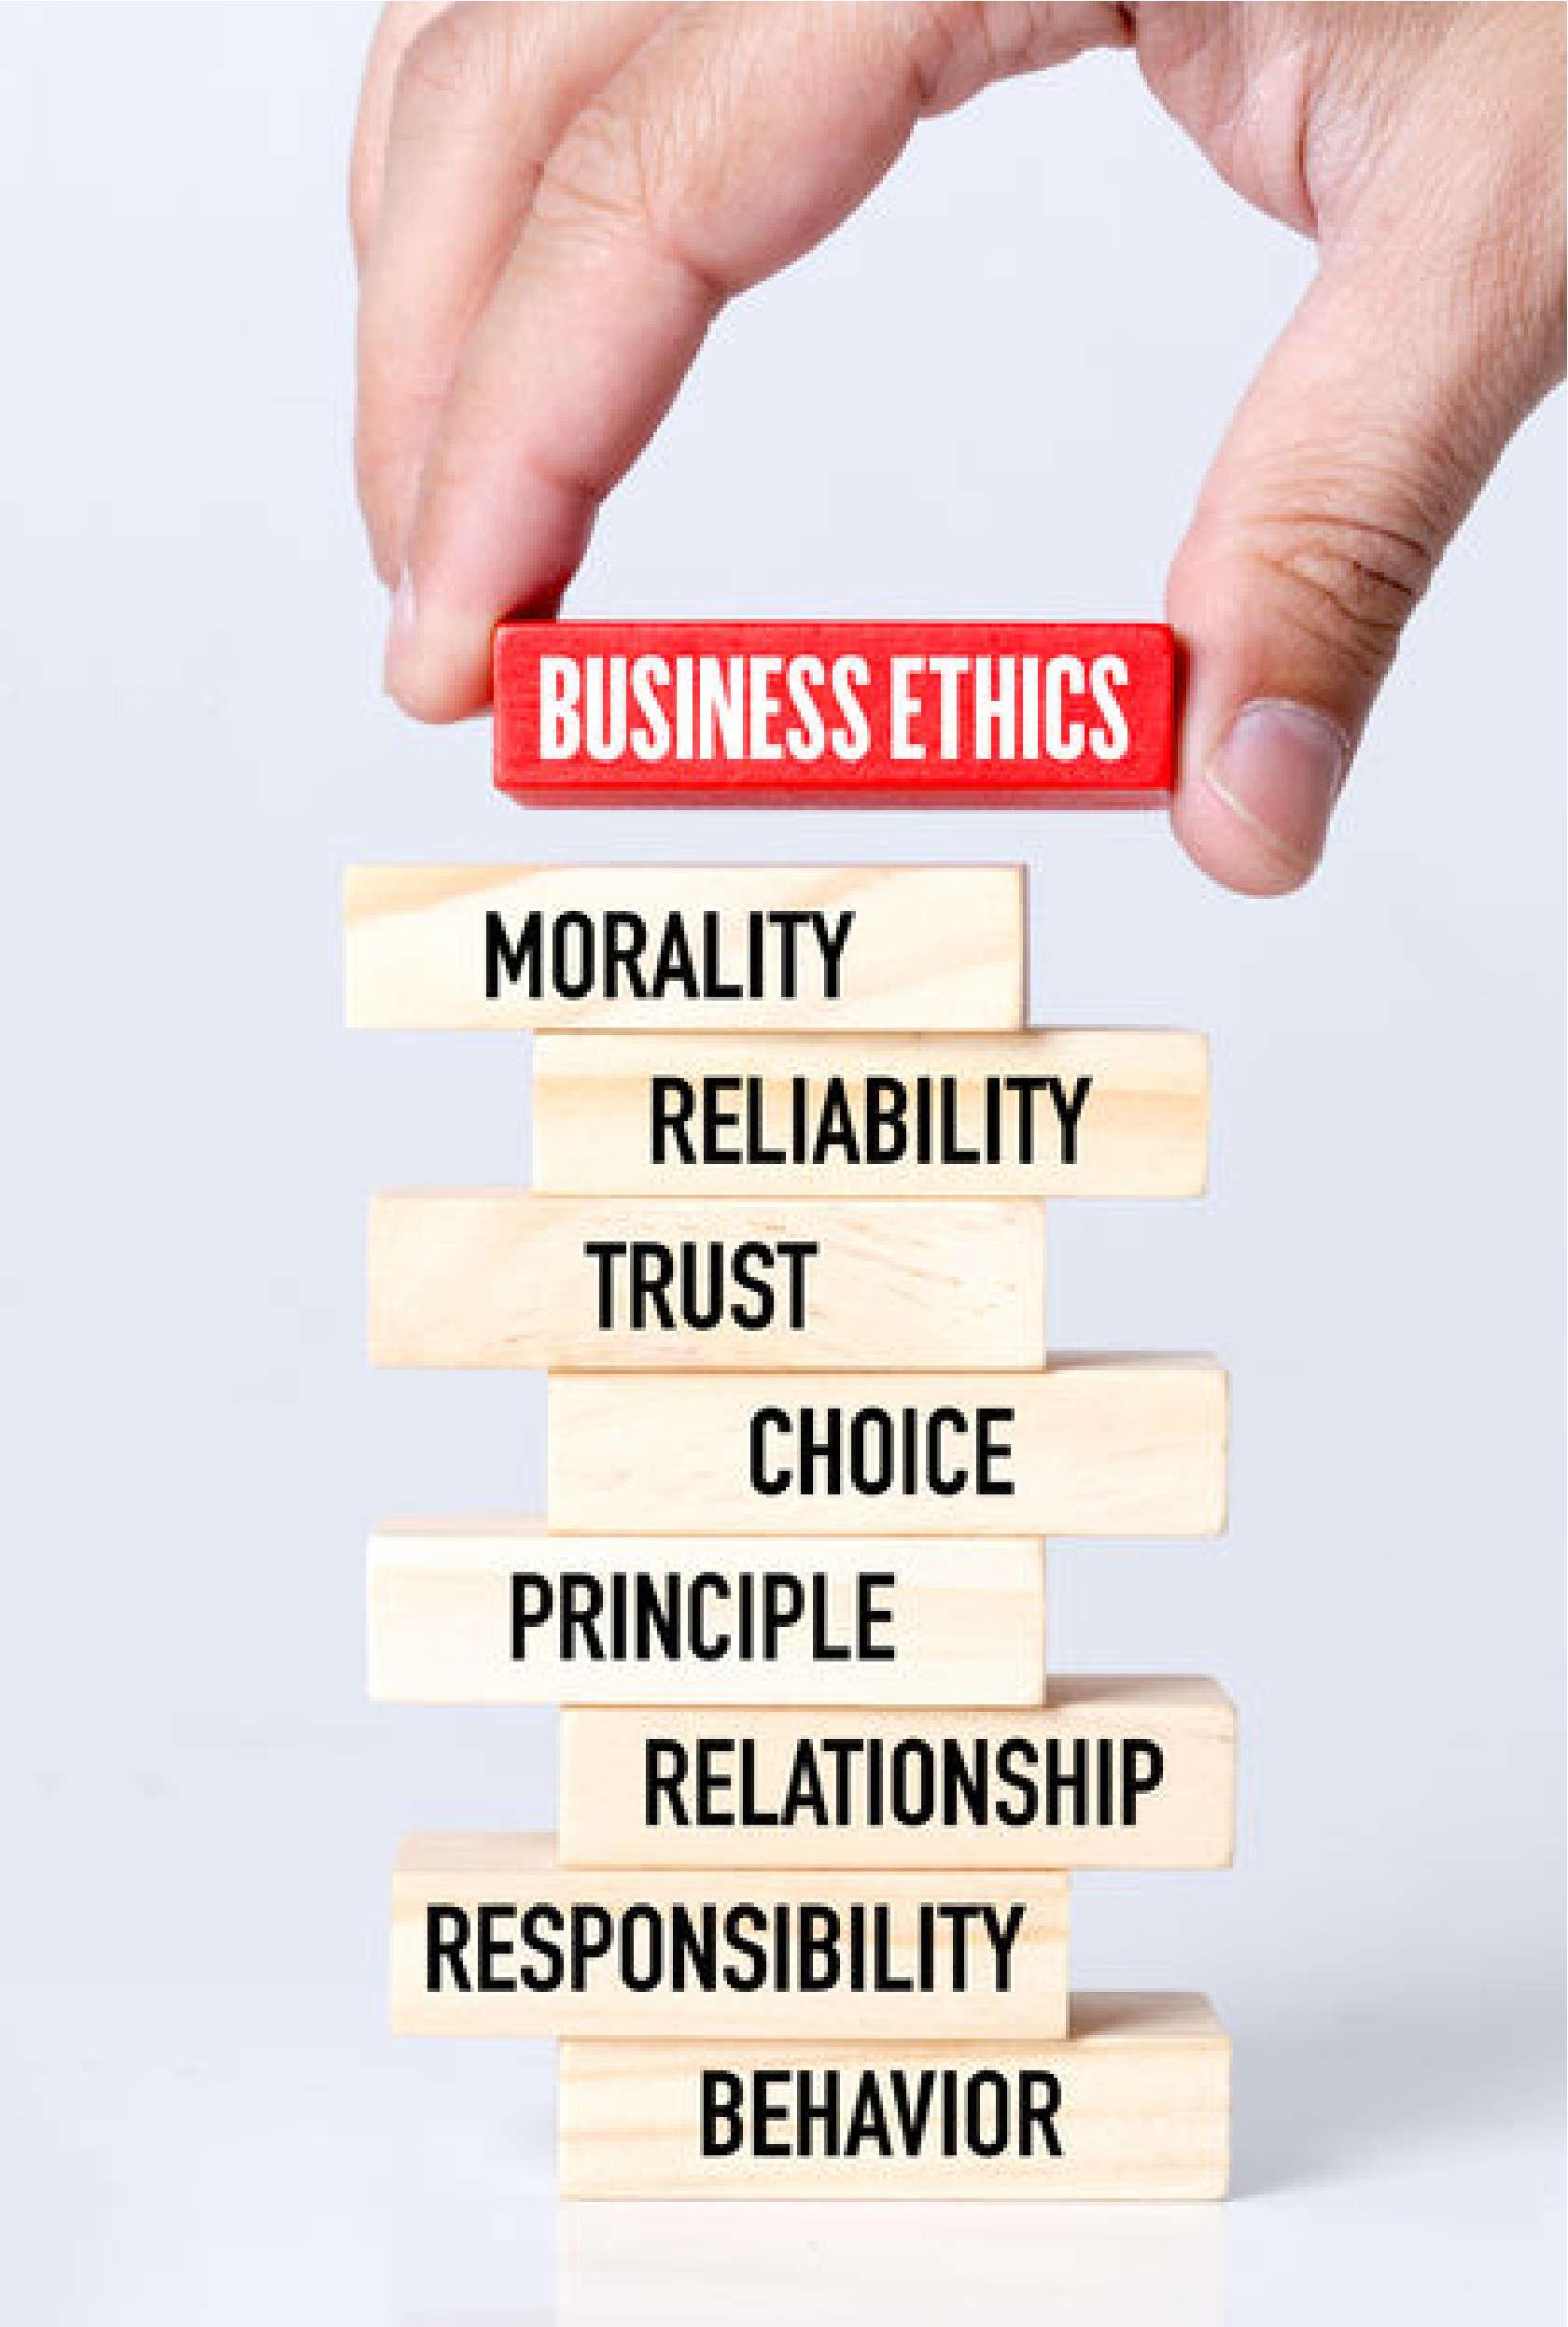 Are you keeping ethics at the core of everything you do?